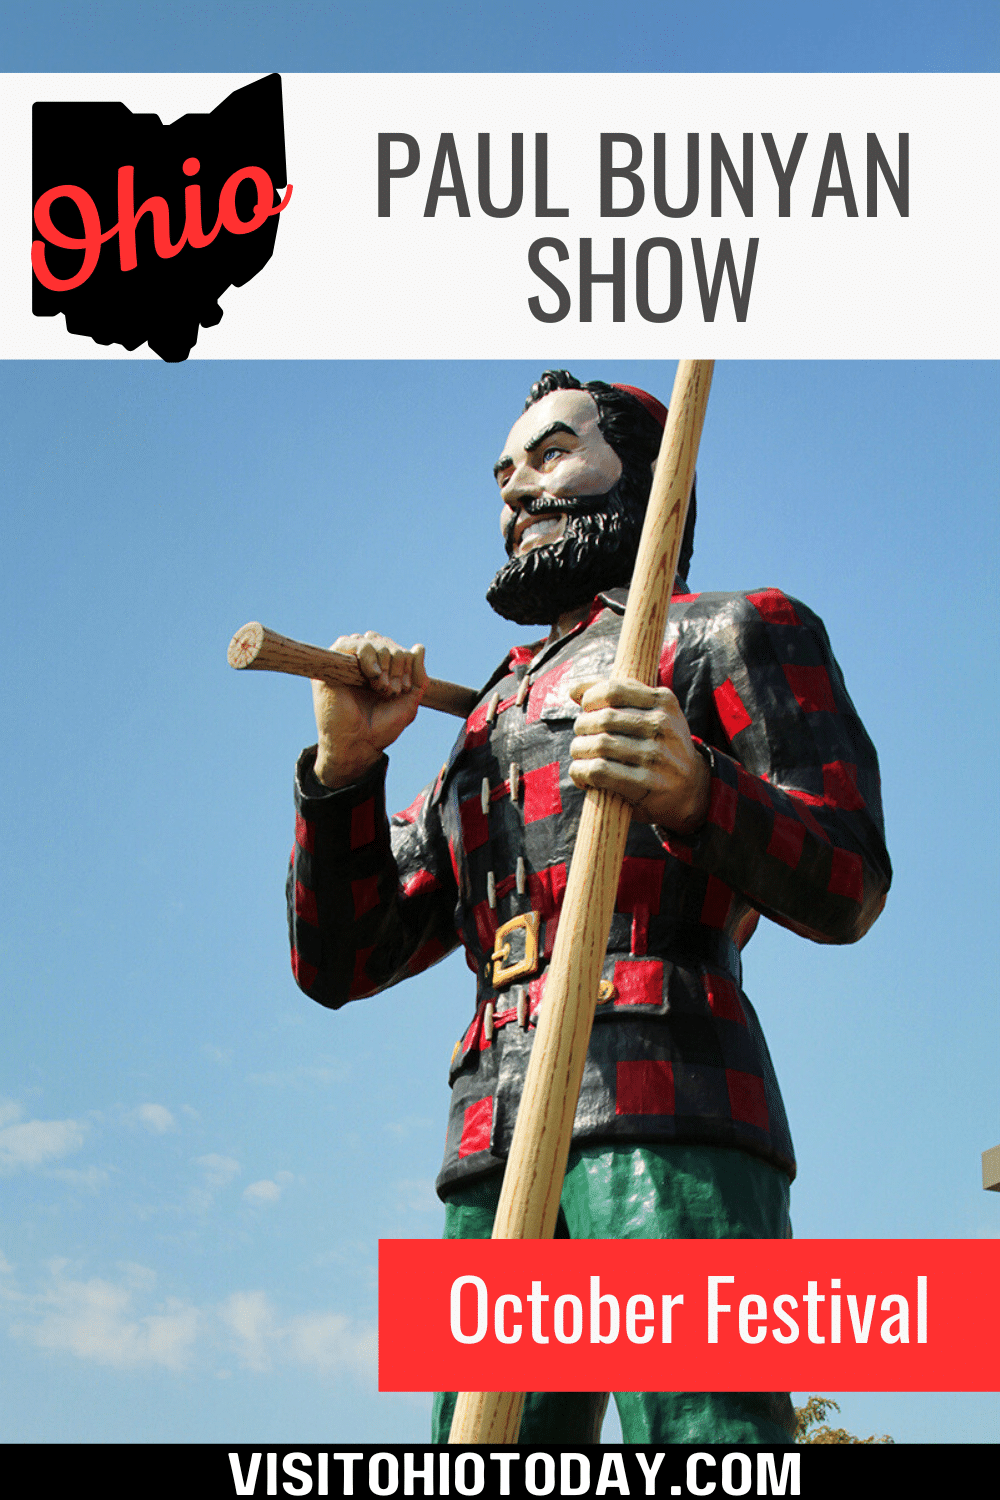 Paul Bunyan Show is hosted by The Ohio Forestry Association on the weekend of 6-8 October, 2023 at the Guernsey County Fairgrounds.